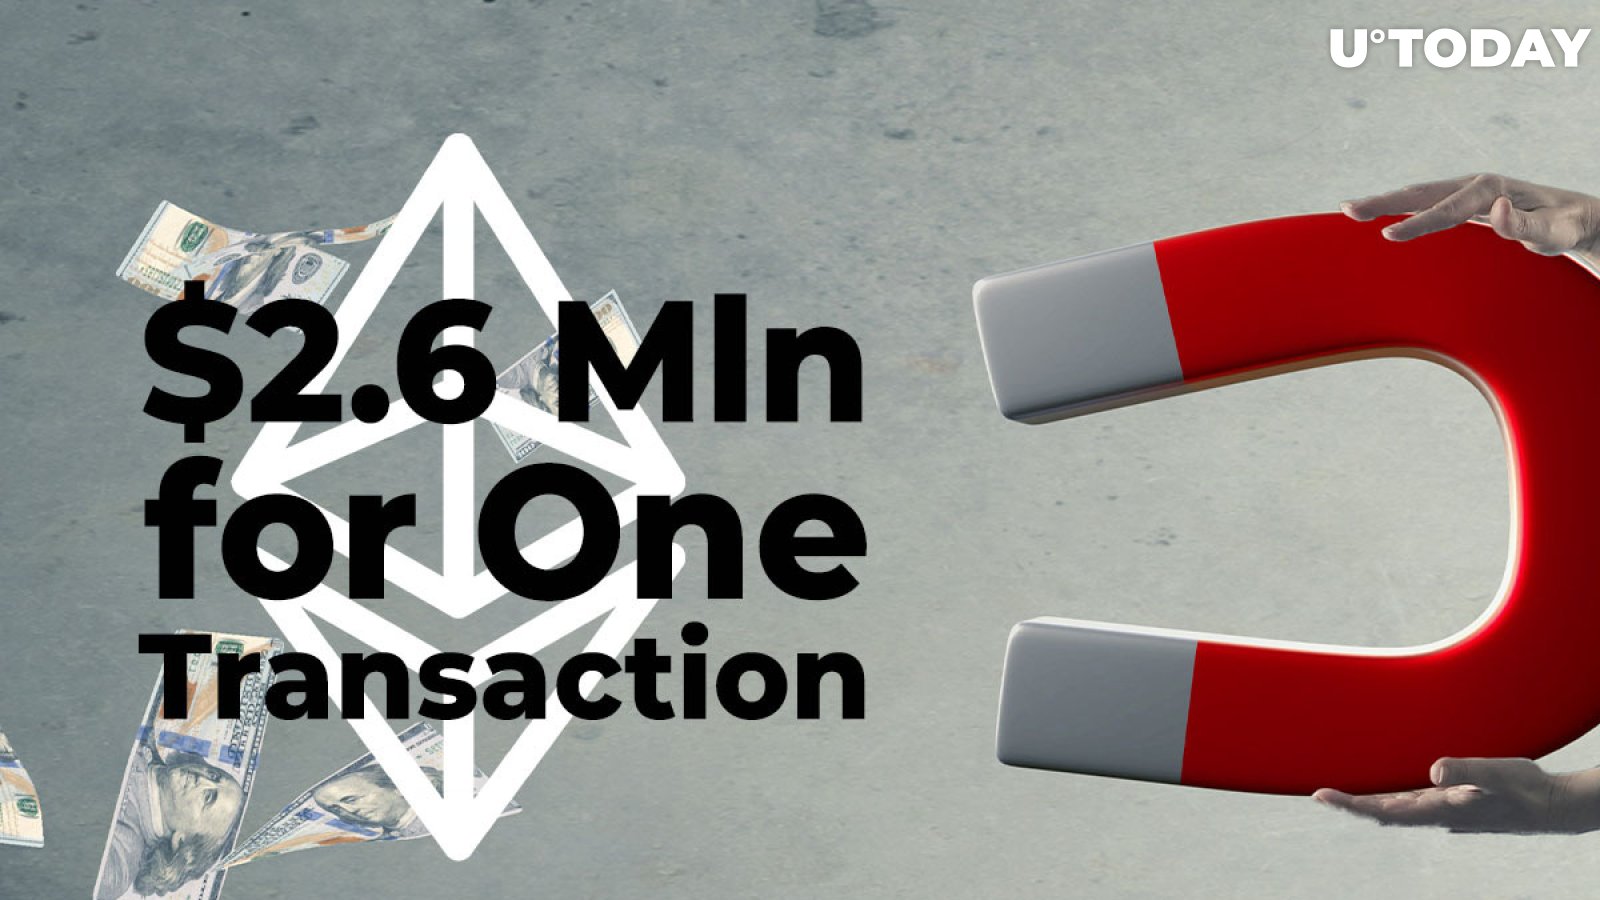 Ethereum User Pays $2.6 Mln for One Transaction. Here's What Happened